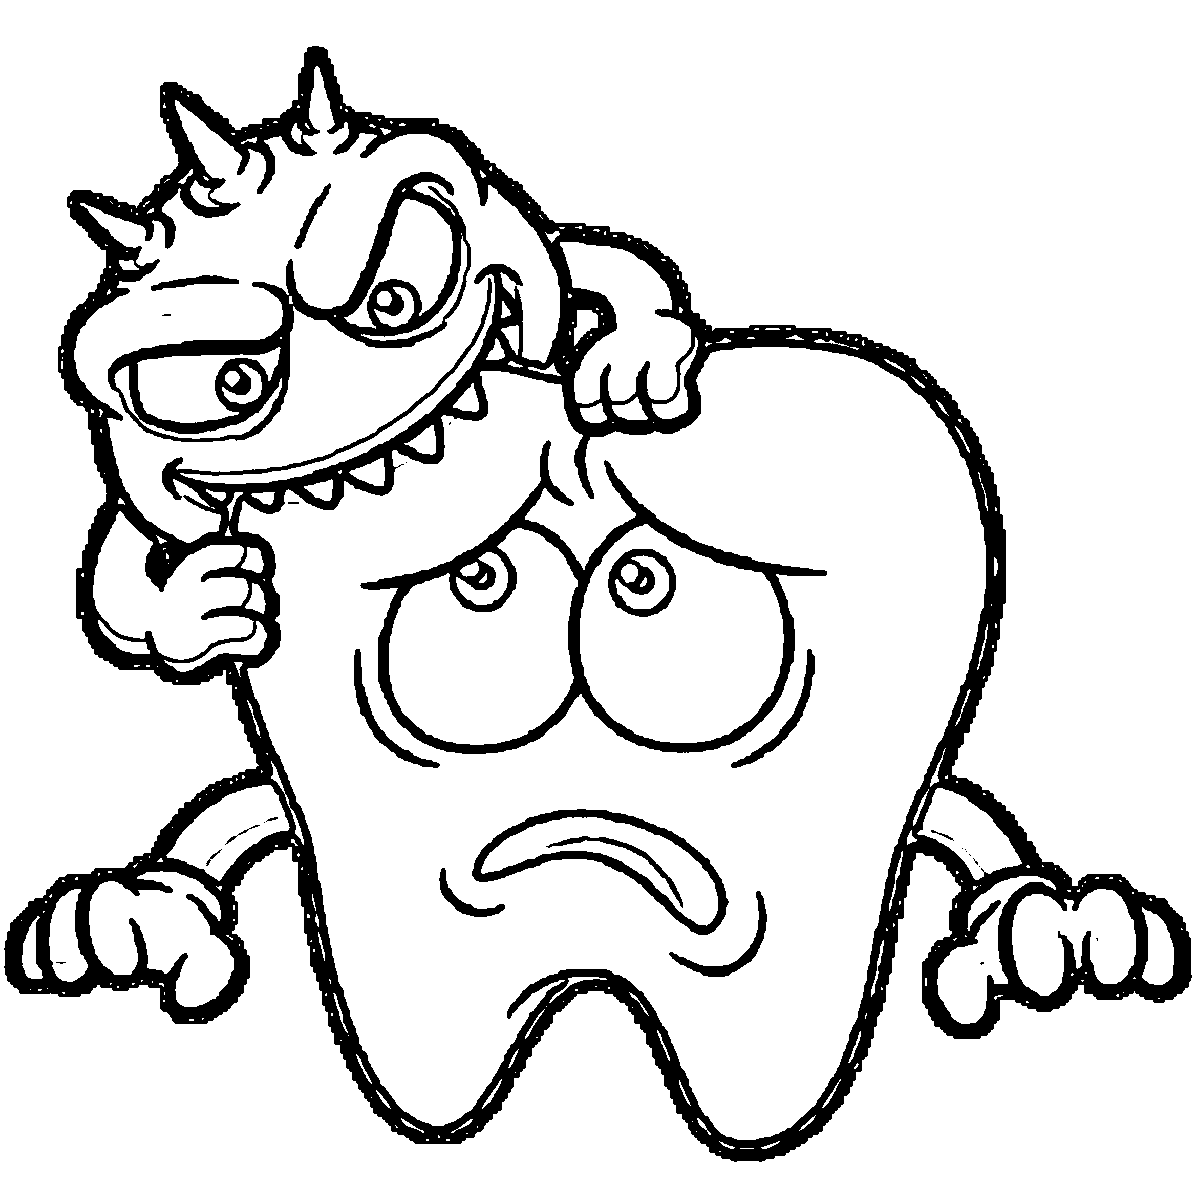 teeth coloring page 10 toothy adult coloring pages printable off the cusp teeth page coloring 